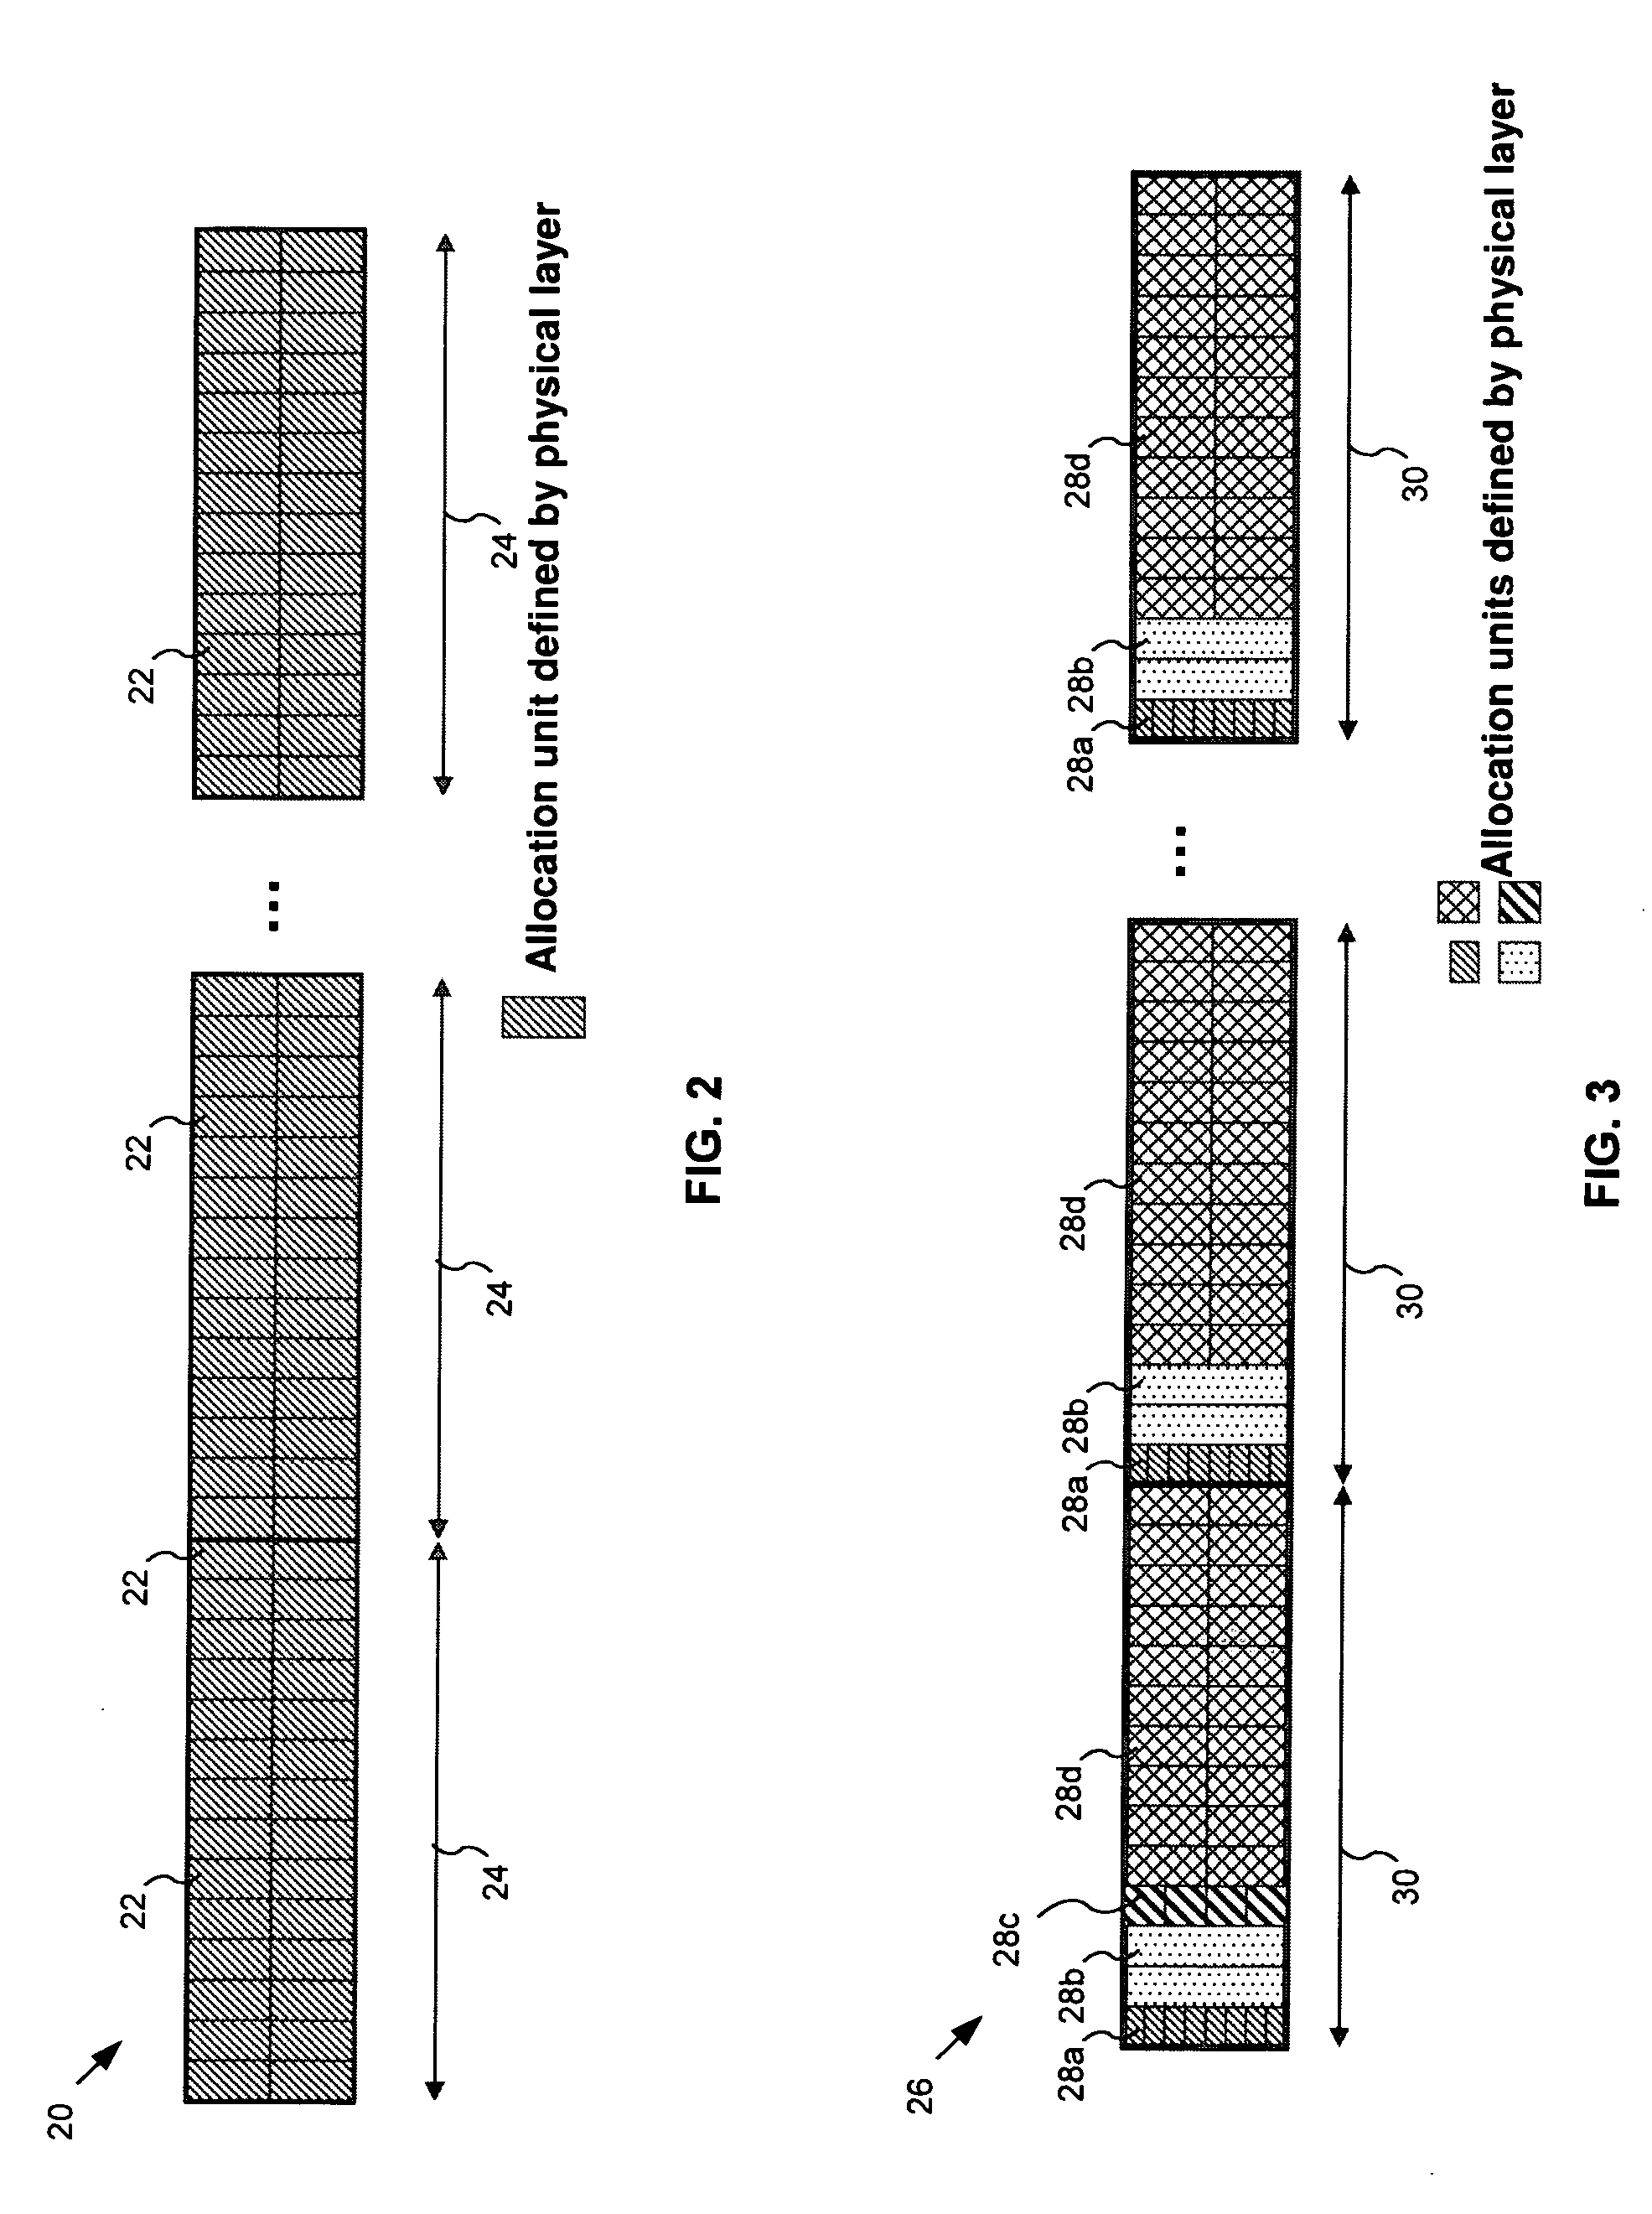 Method and system for allocating media access control layer resources in a wireless communication environment